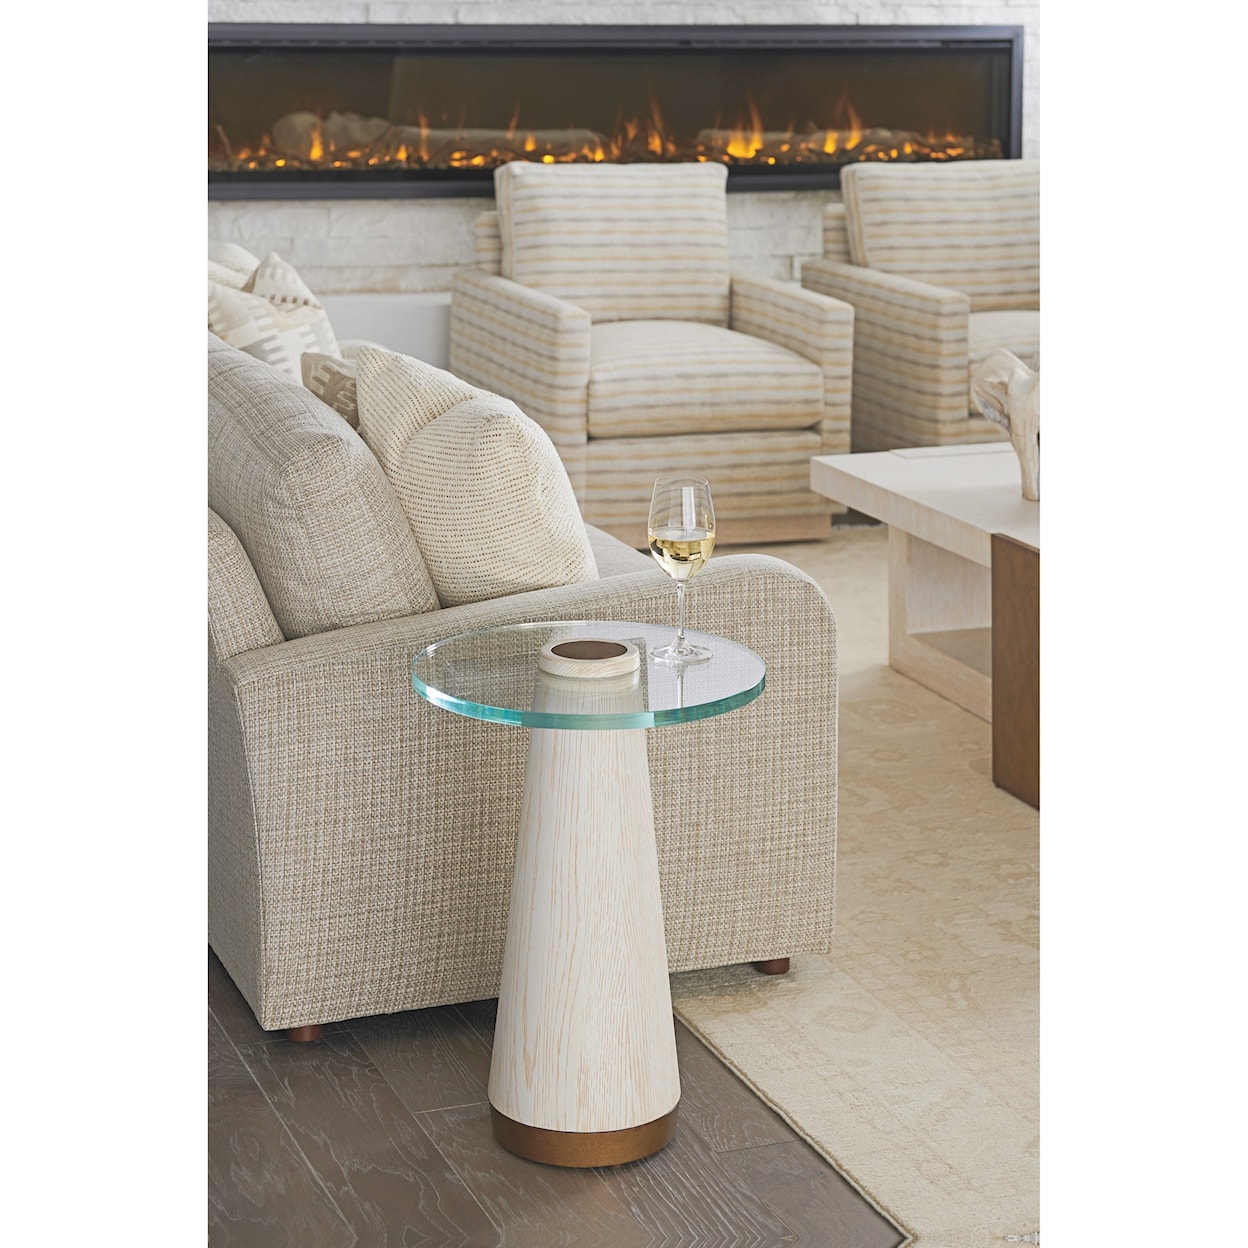 Barclay Butera Carmel Castlewood Glass Top Accent Table